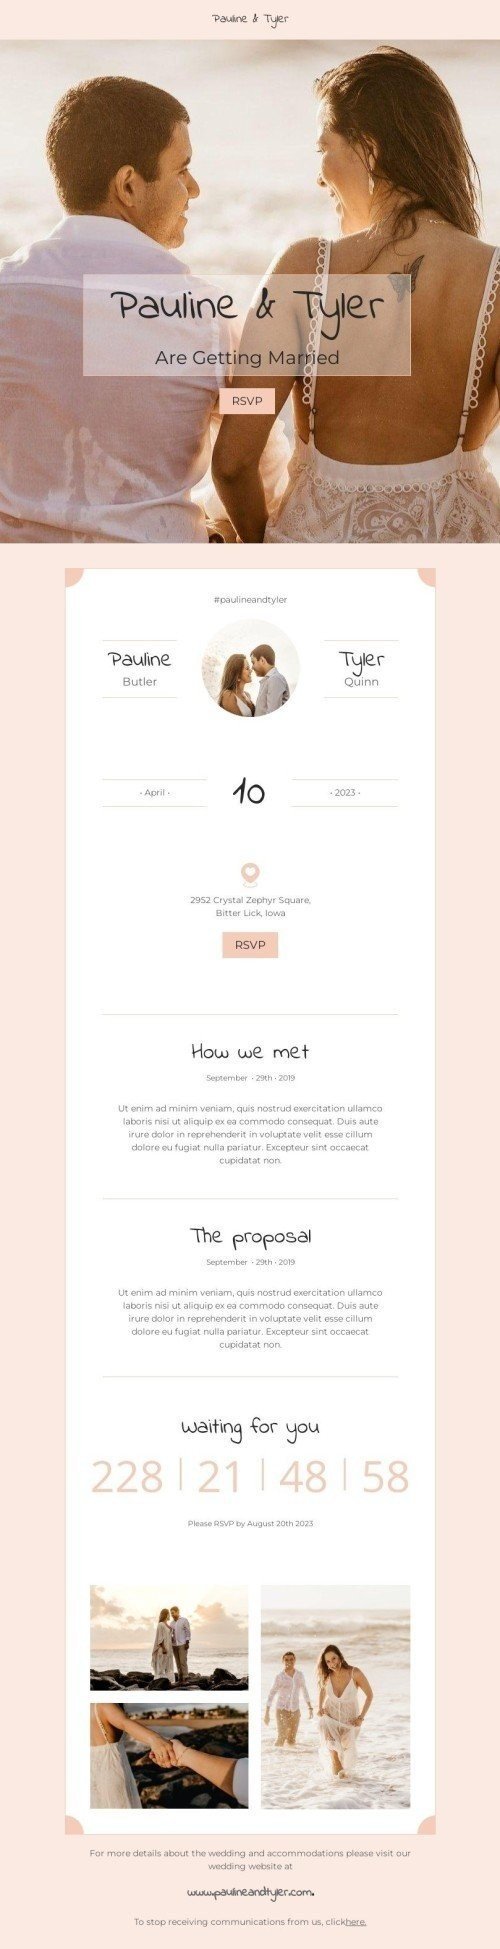 Wedding Invitation Email Template "Pauline and Tyler are getting married" for Hobbies industry mobile view